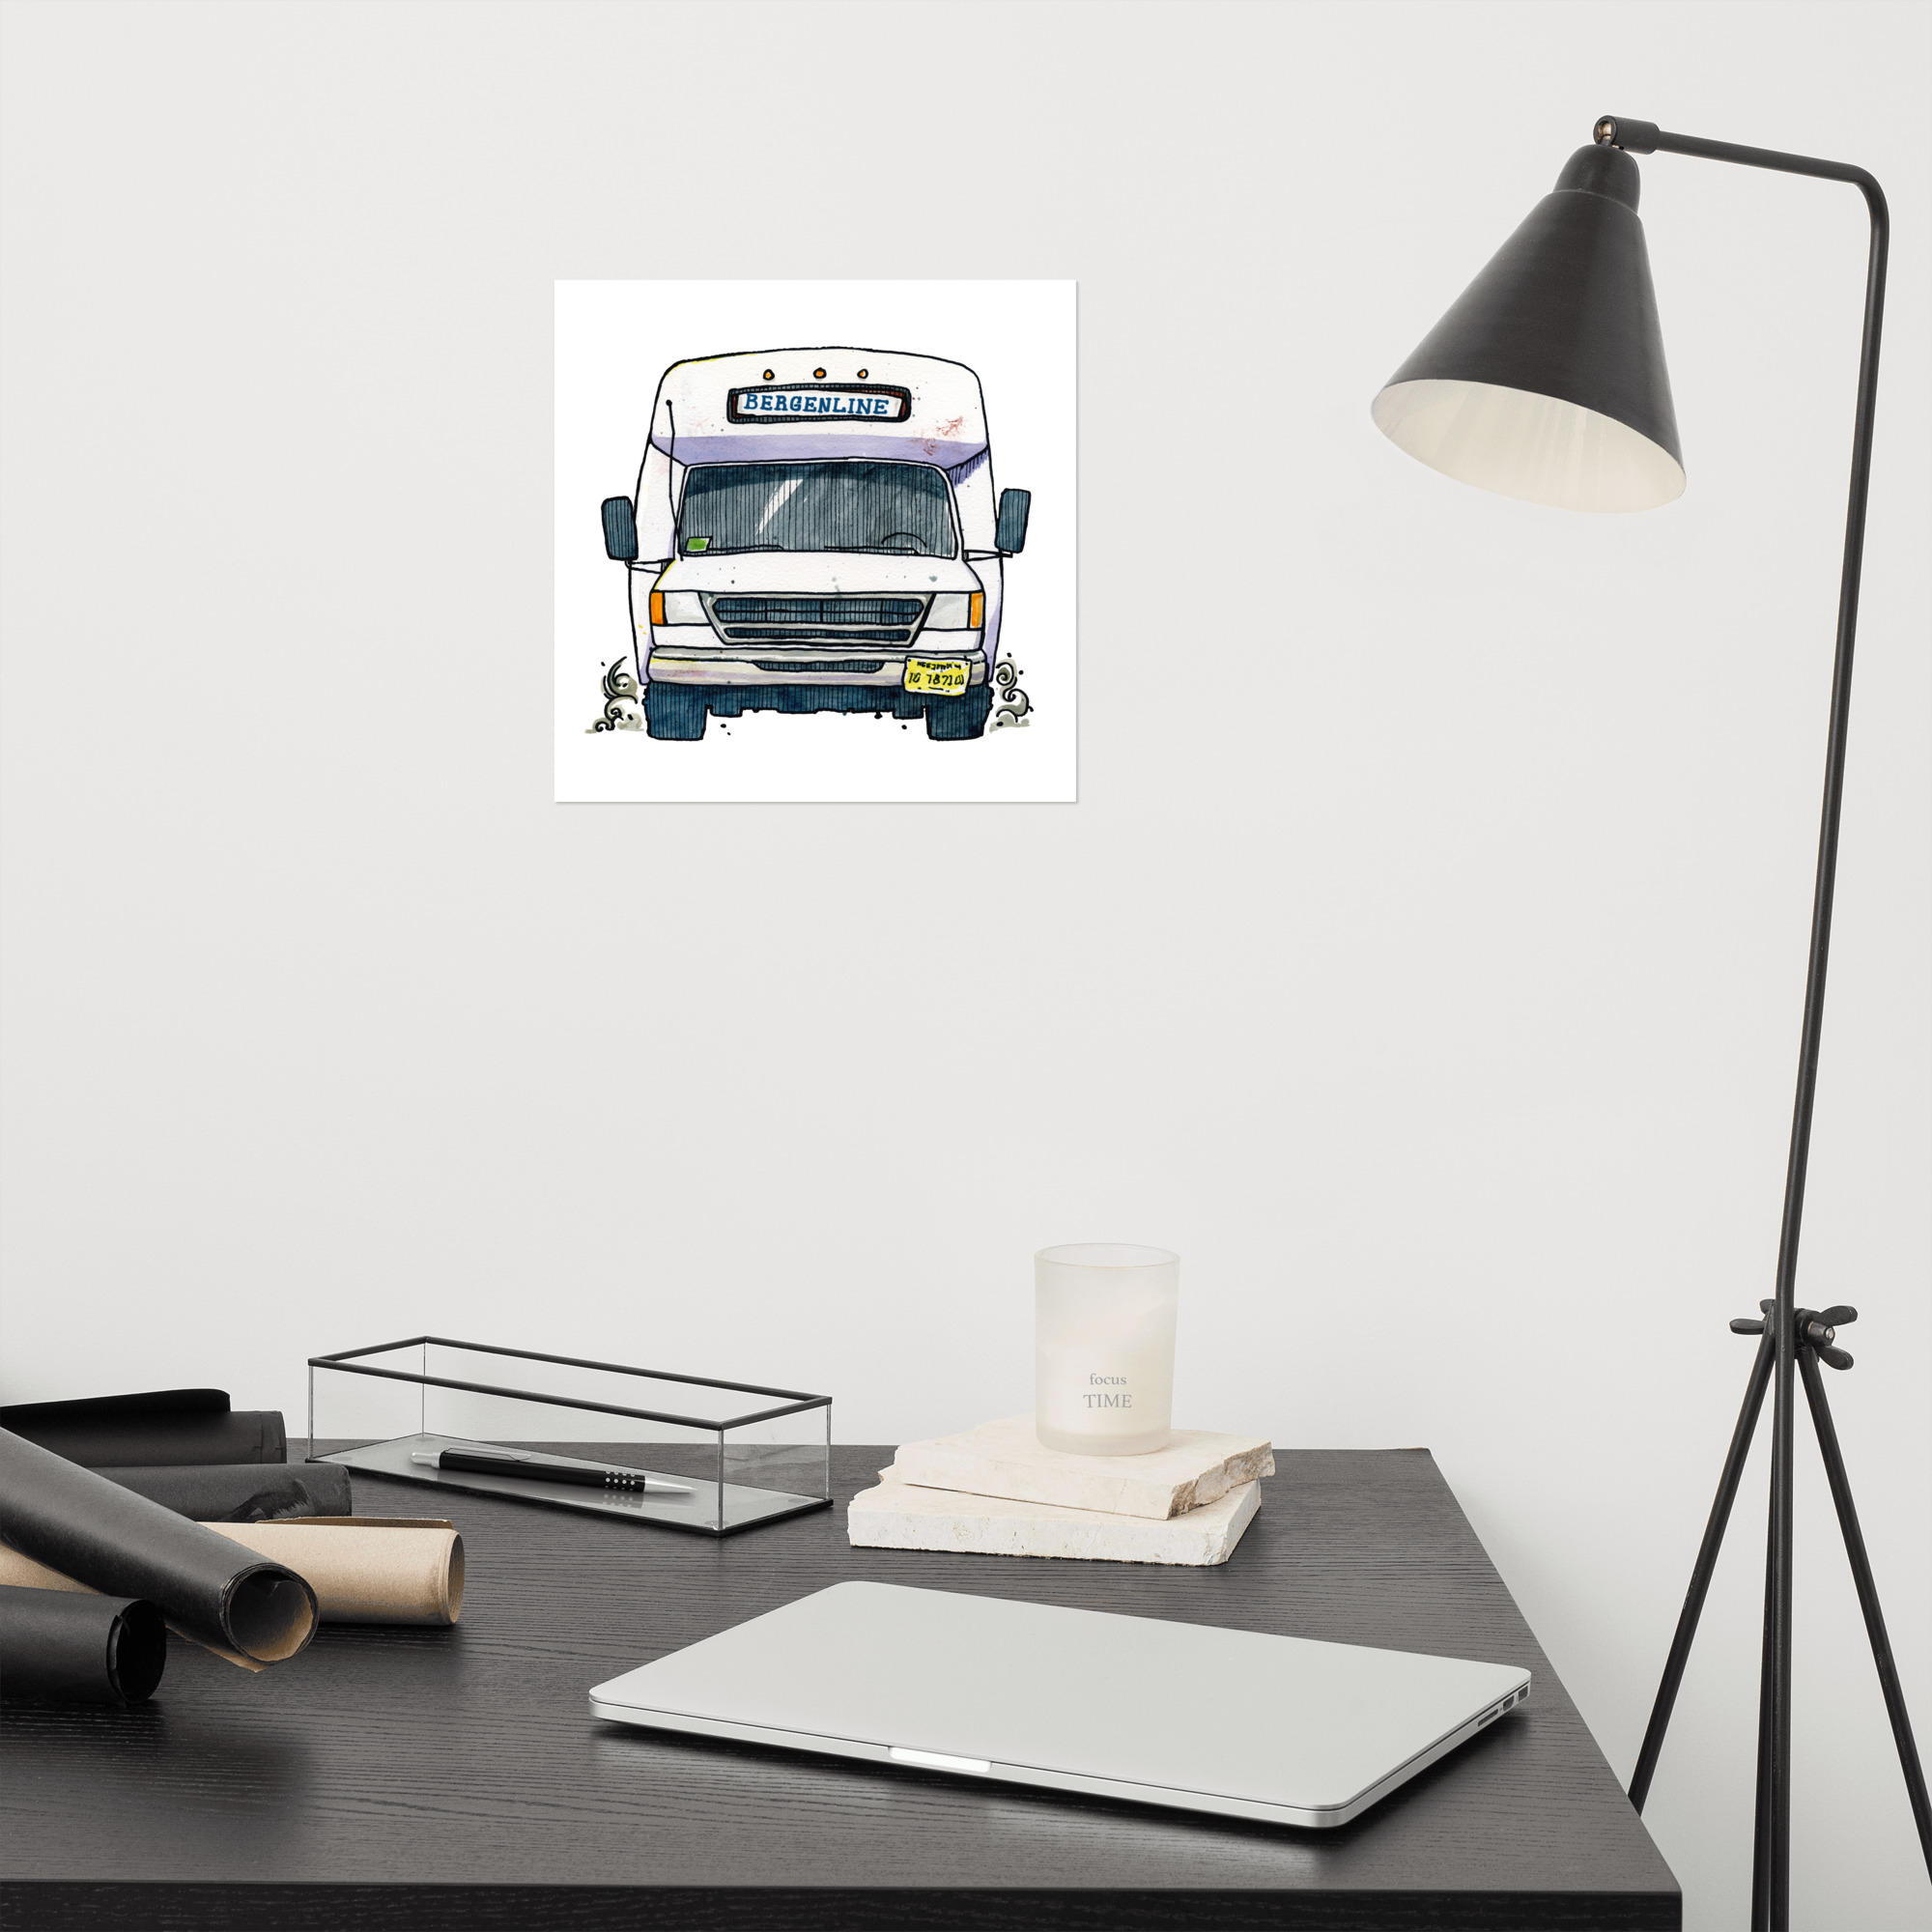 an illustration of a Bergenline jitney dollar bus from Union City, NJ over a desk. Designed by Kenny Velez